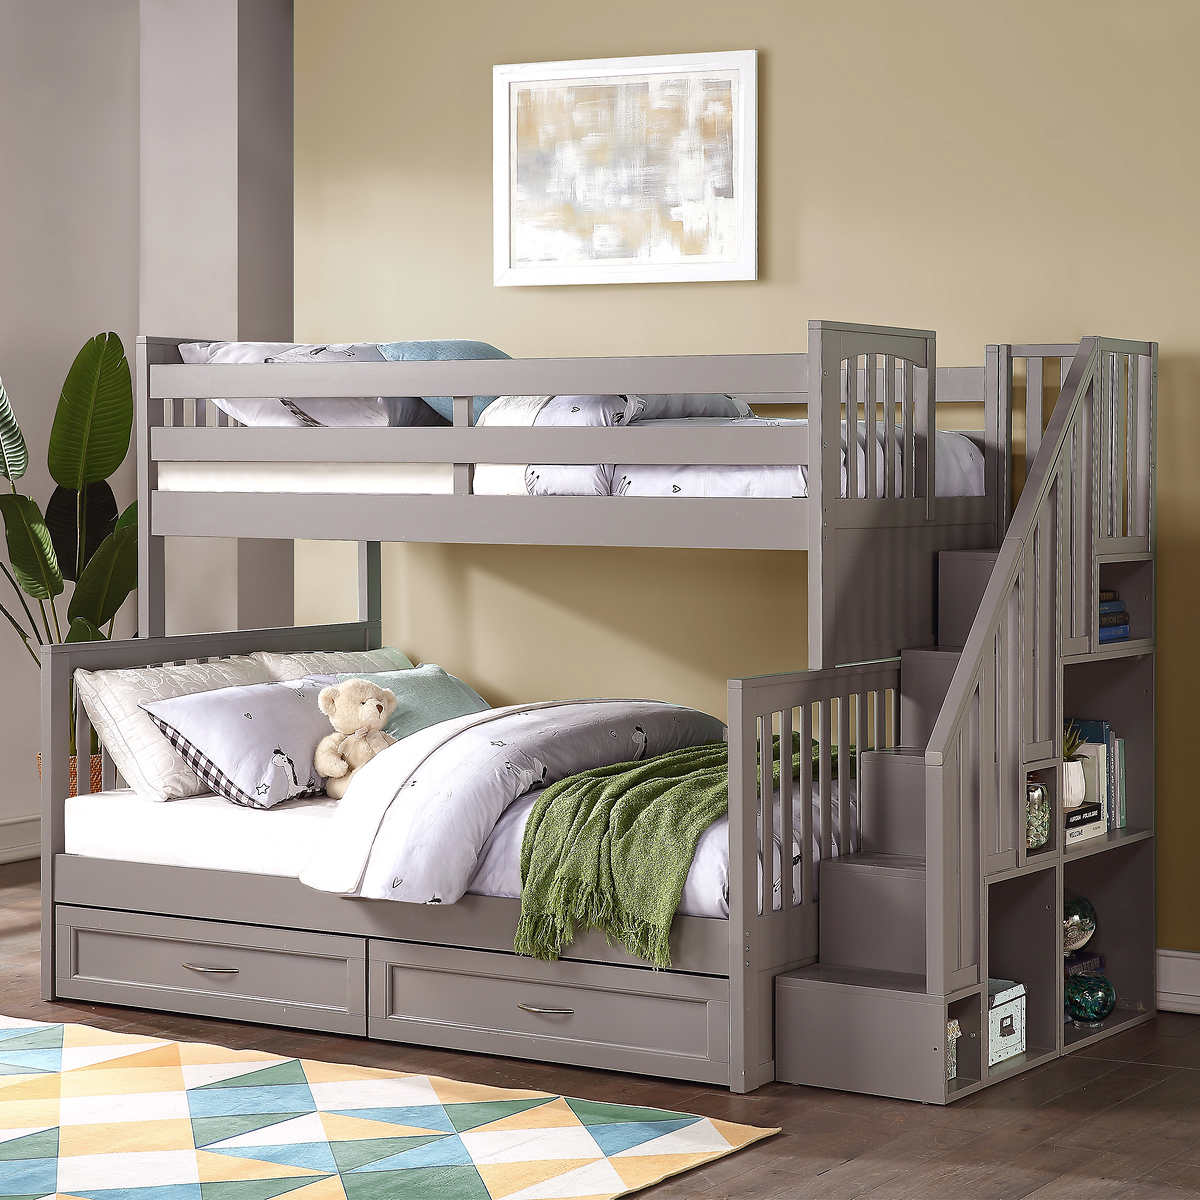 Vandalay Twin Over Double Bunk Bed With, Best Twin Over Bunk Beds With Stairs